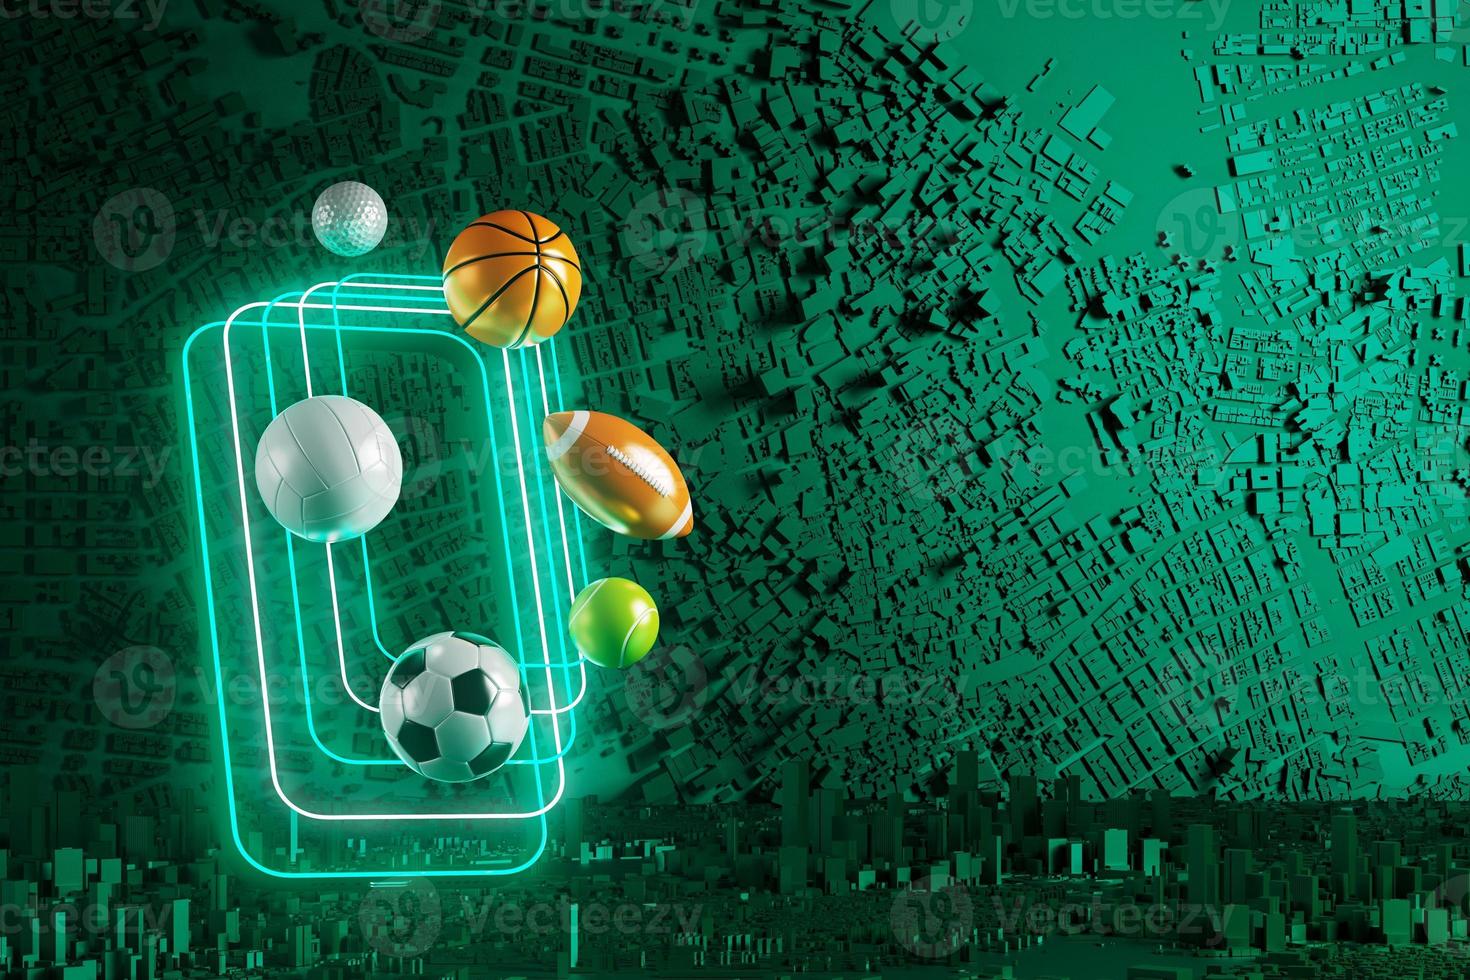 3d sport rendering. background for a sports game. 3d illustration. realistic abstract backdrop. ball object. copy space. tennis soccer basketball golf rugby volleyball elements. neon concept design. photo